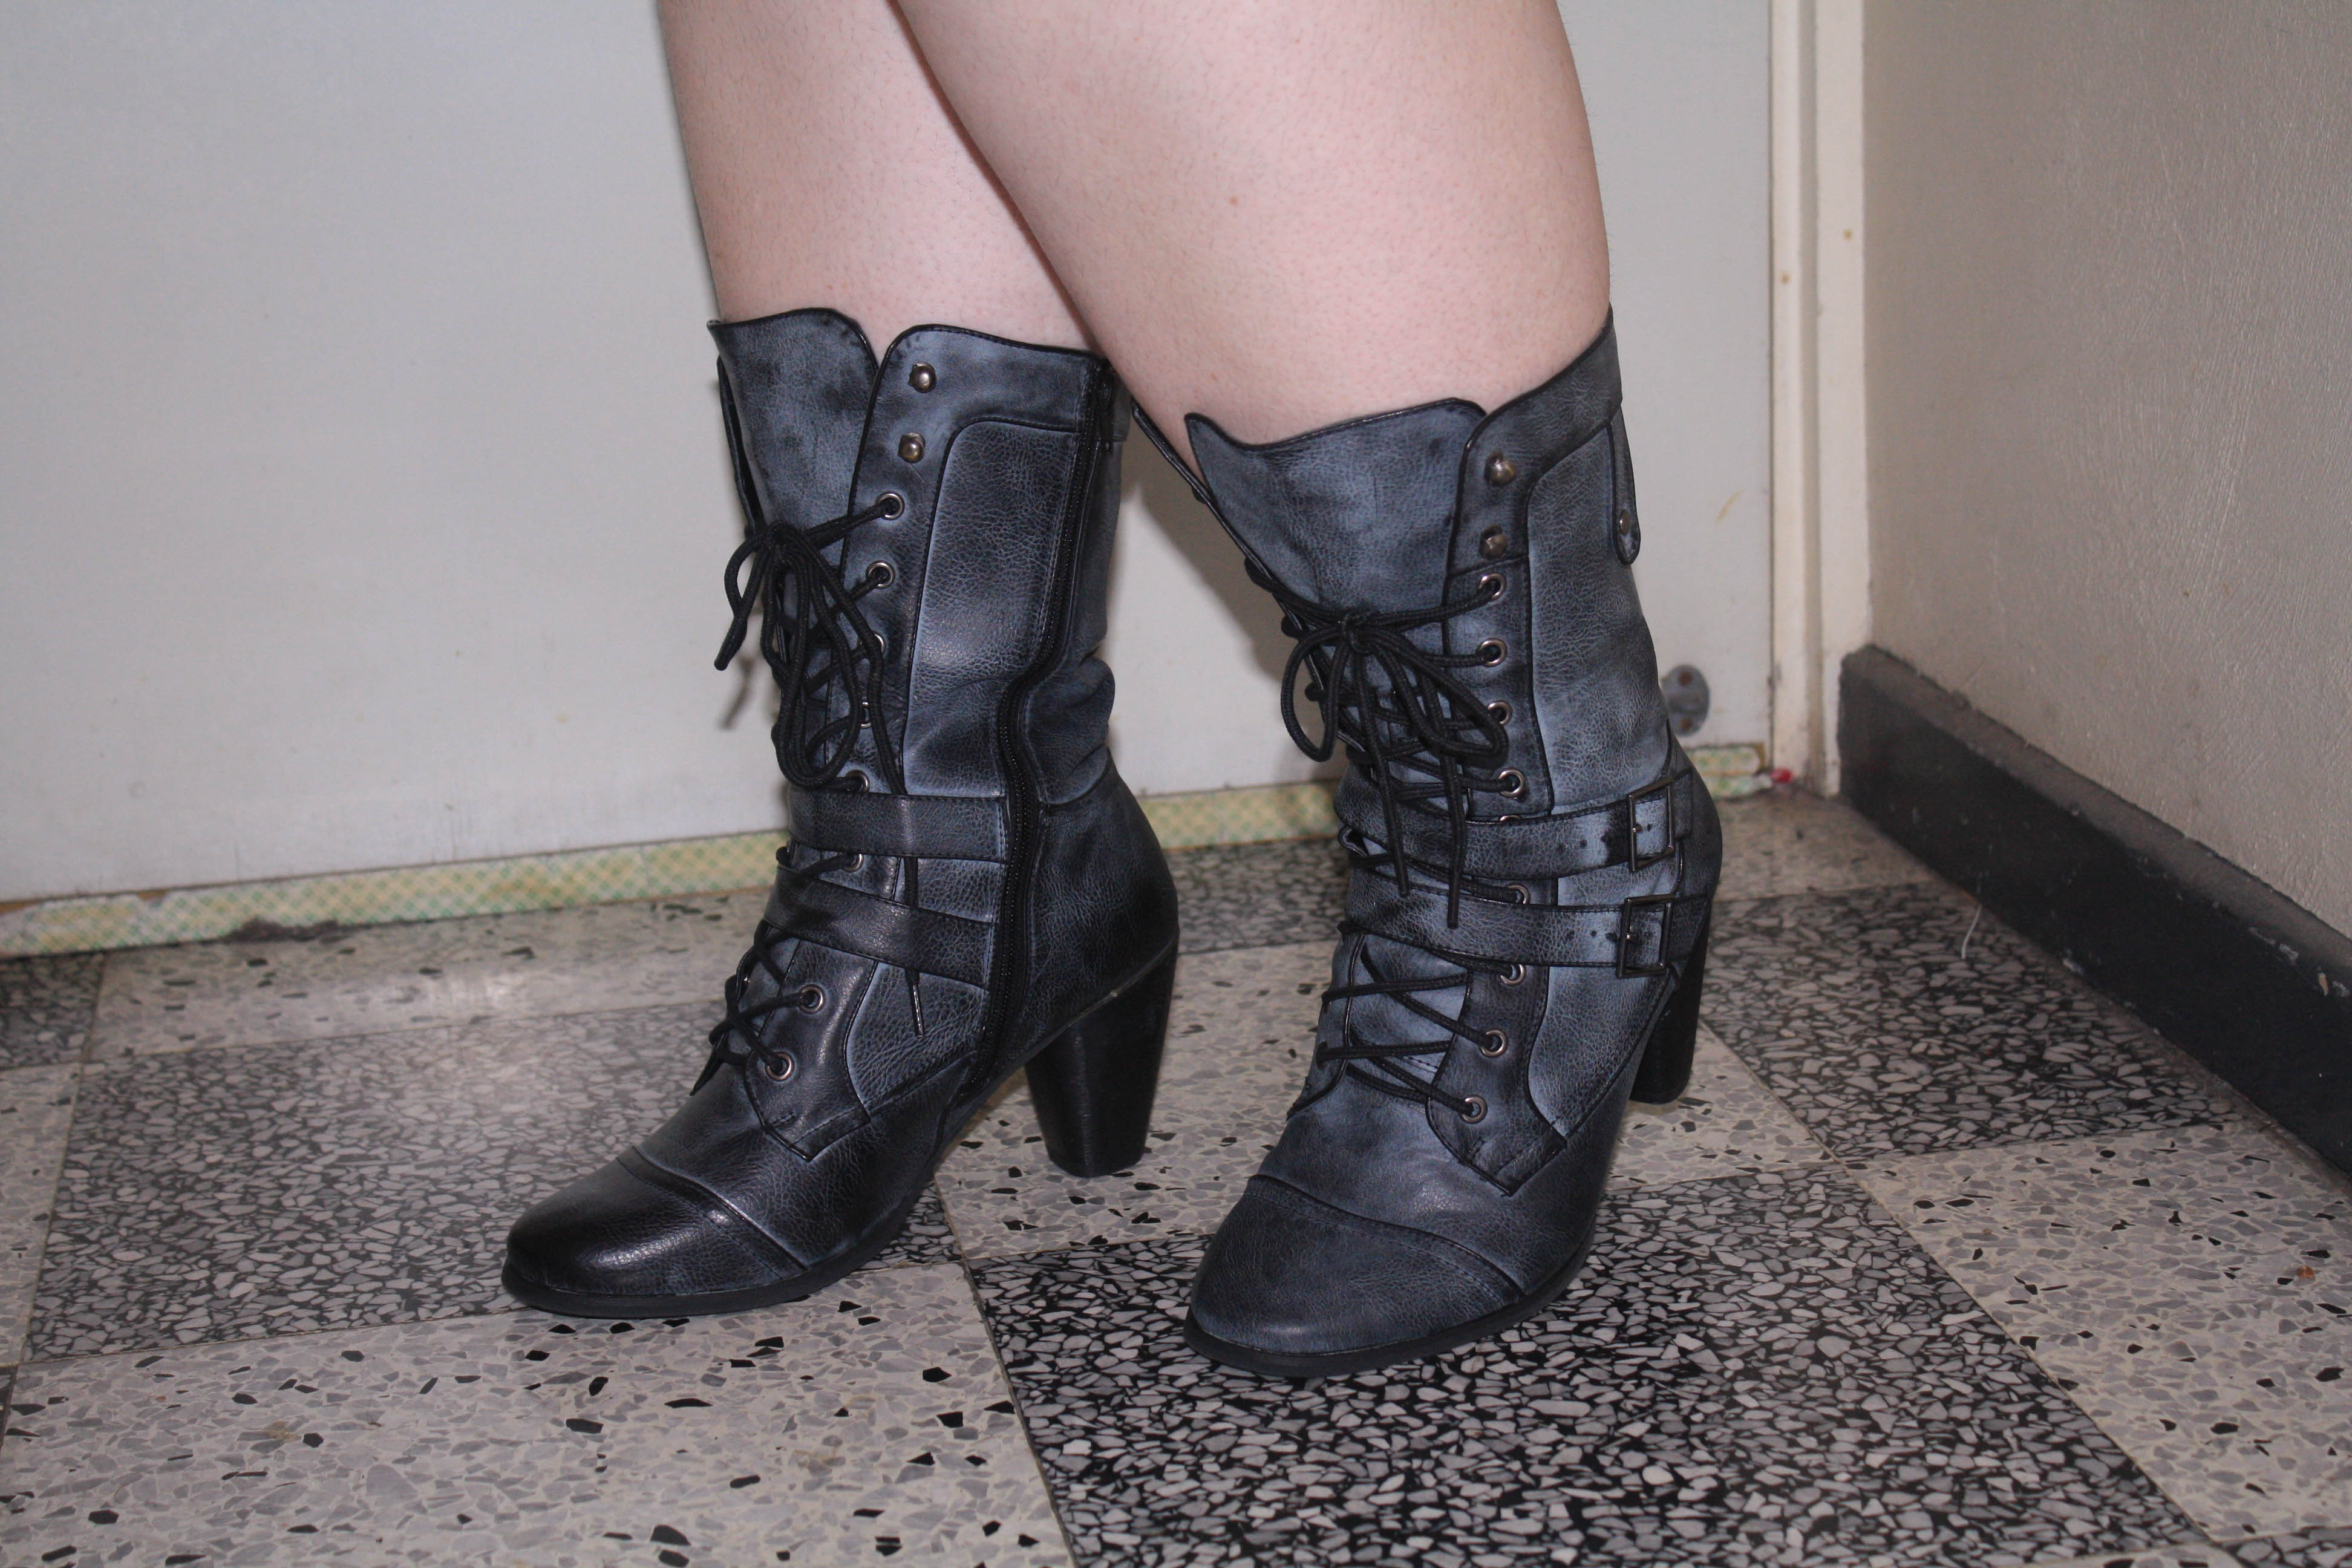 Photo of my feet and calves shod in black and grey distressed looking witchy boots. They lace up and have two tabs that reach across the foot and buckle on the other side.